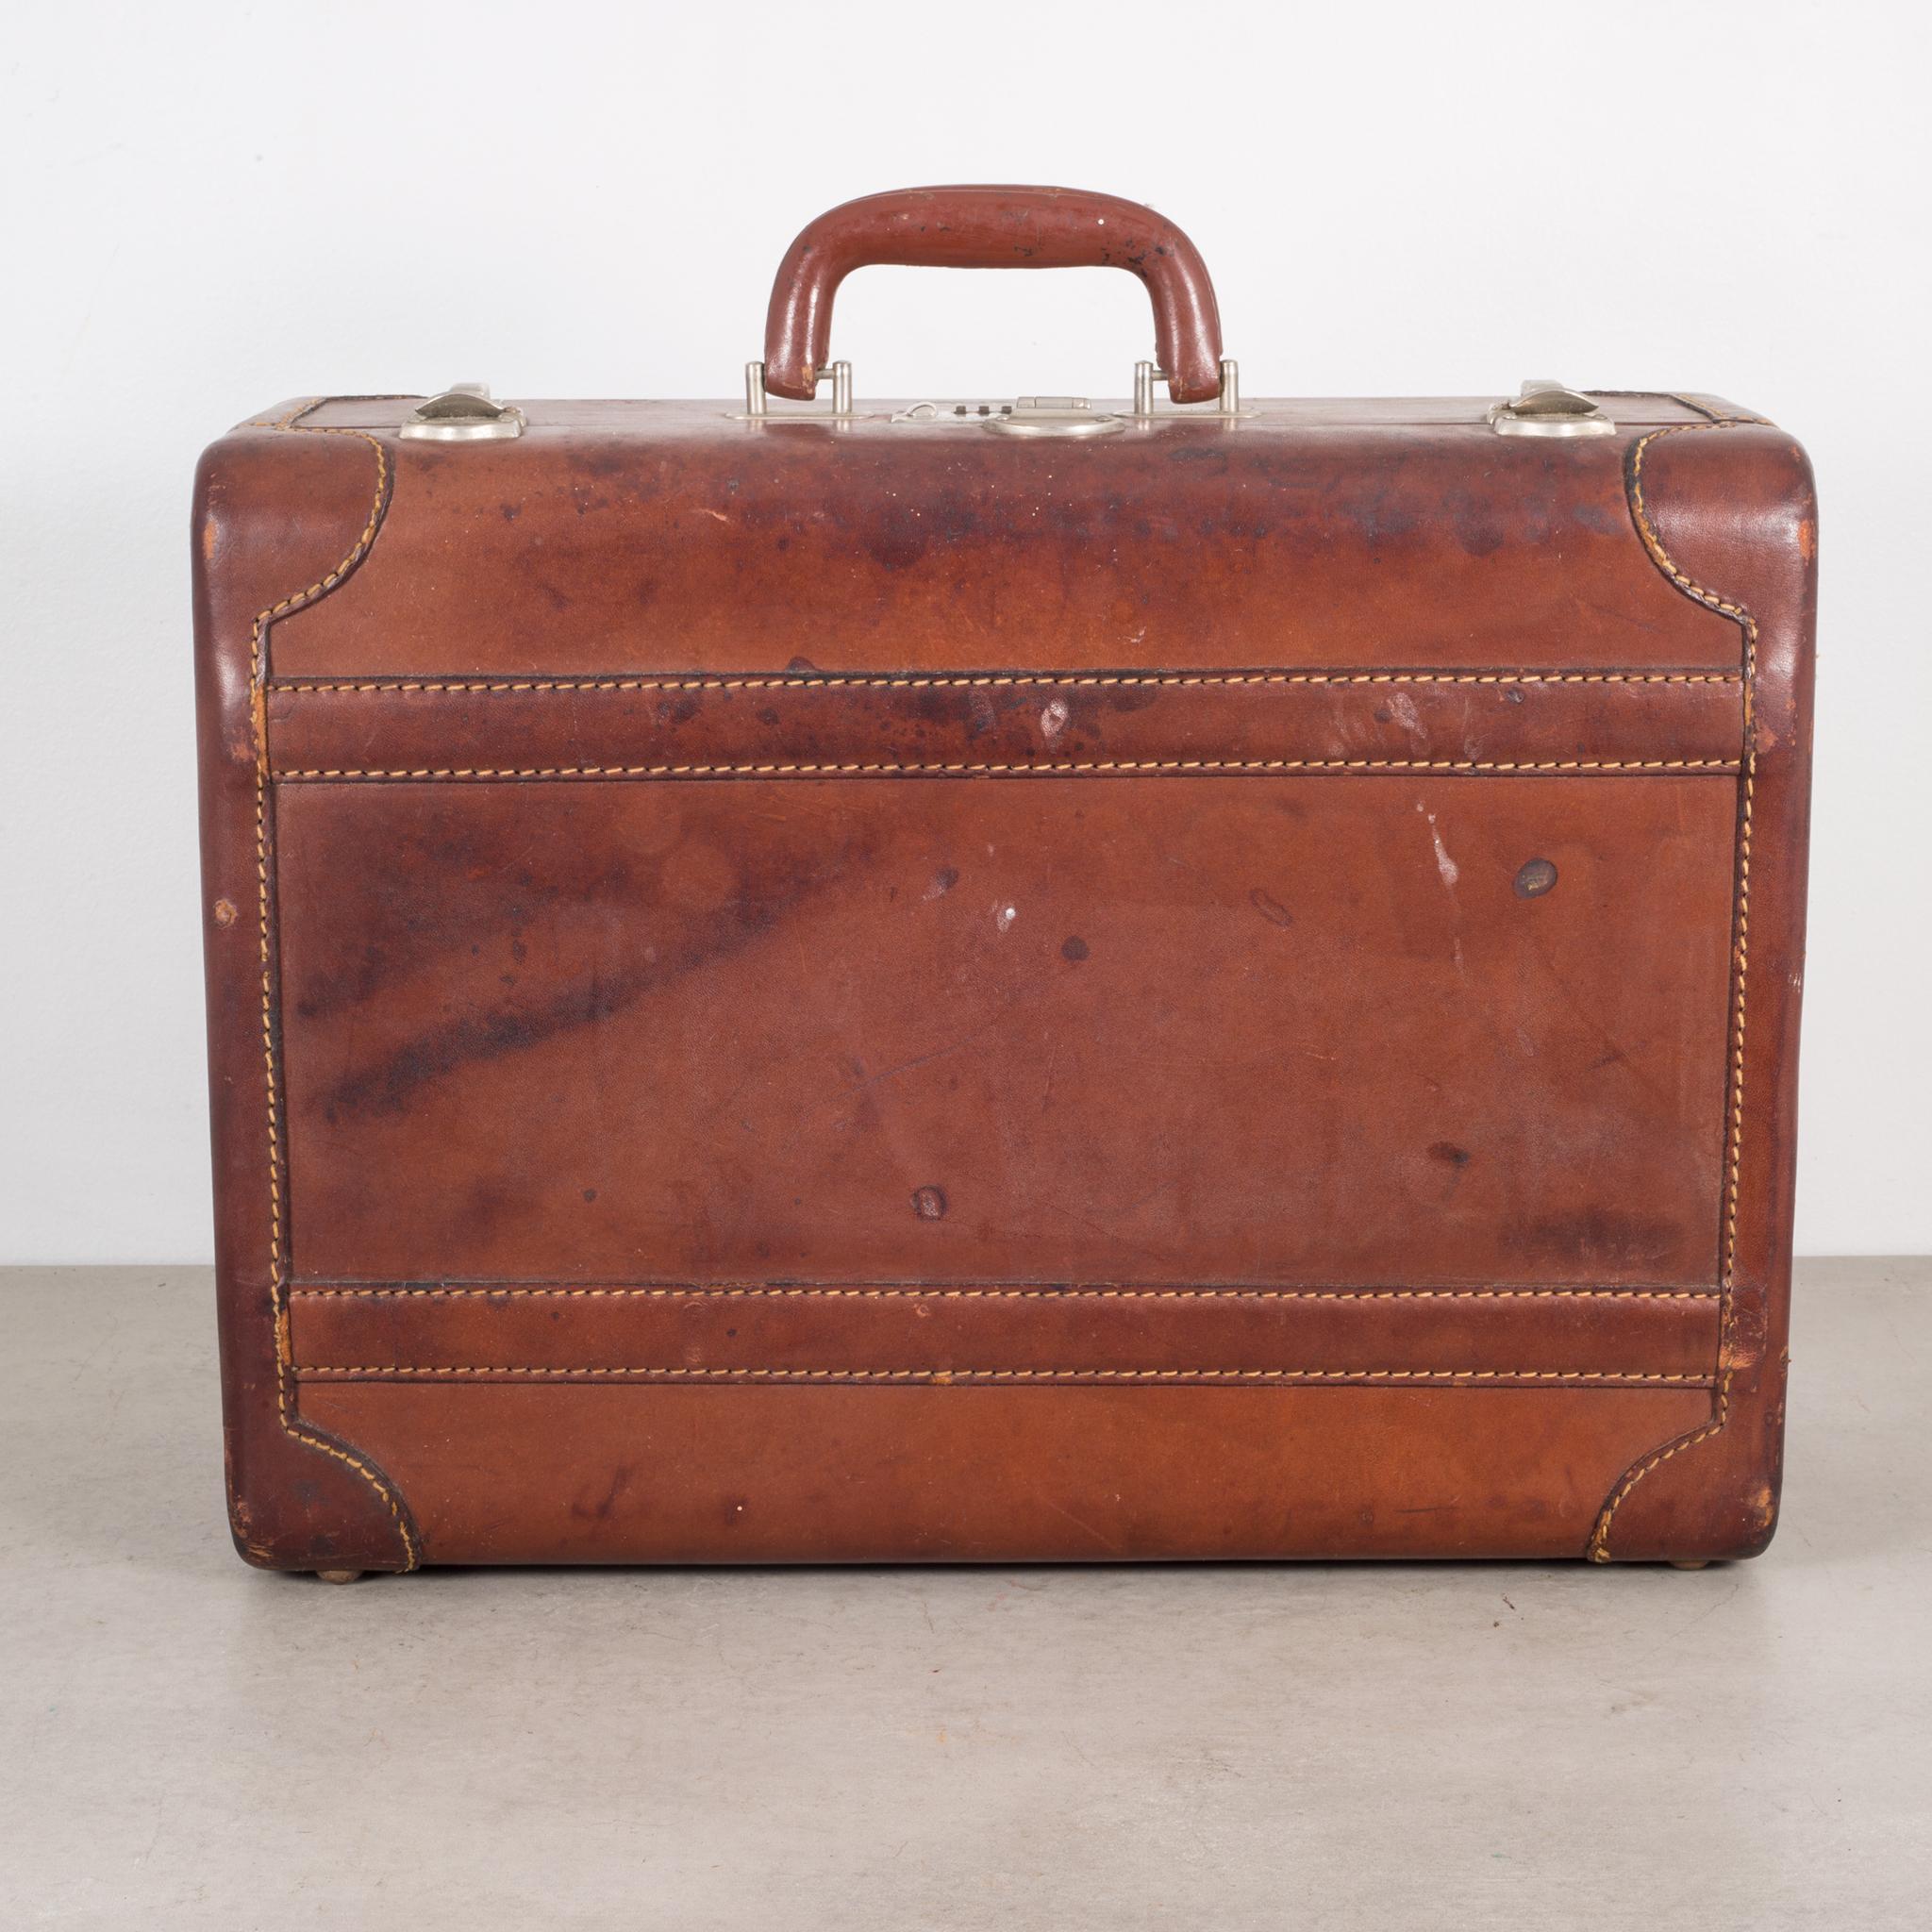 About

A small all leather suitcase with stitched corners, silver locks and a leather handle cover. The luggage is monogrammed 